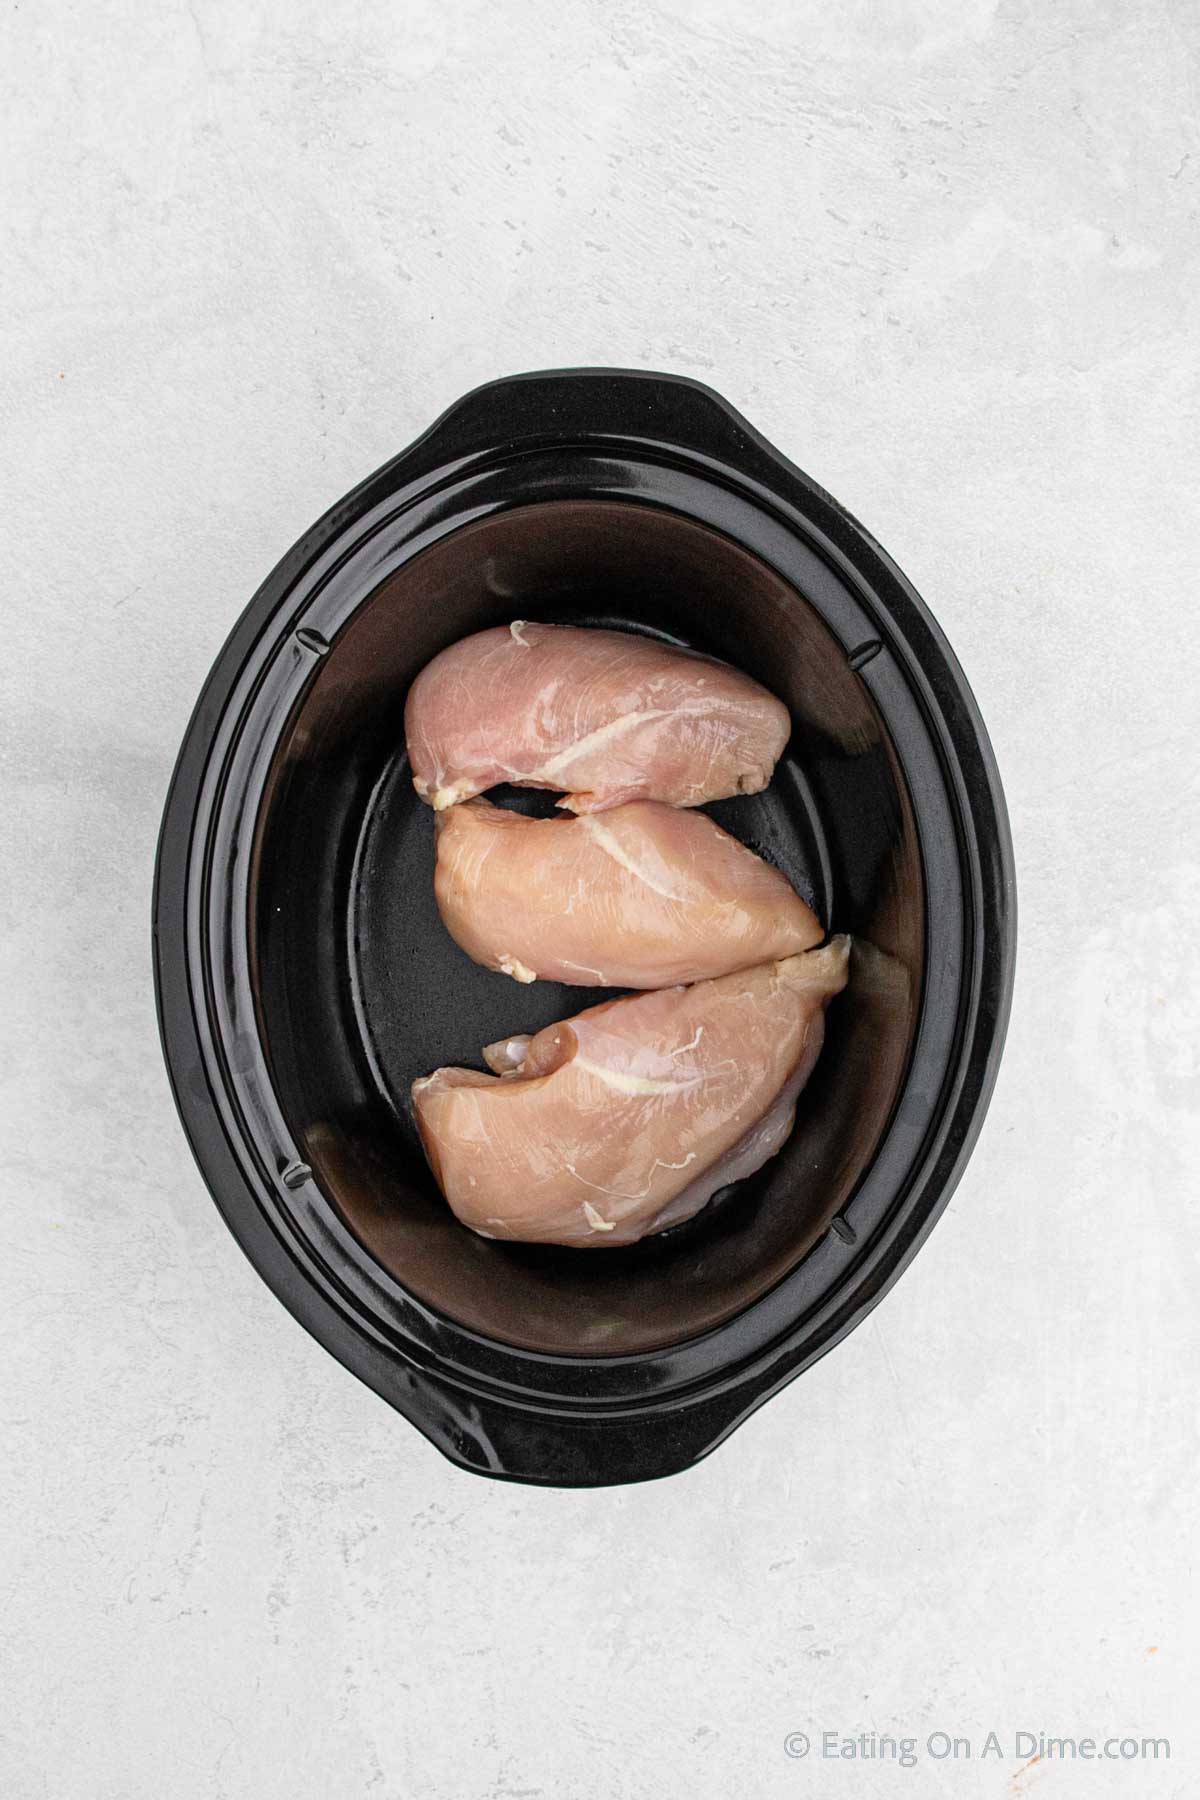 Placing the chicken in the slow cooker